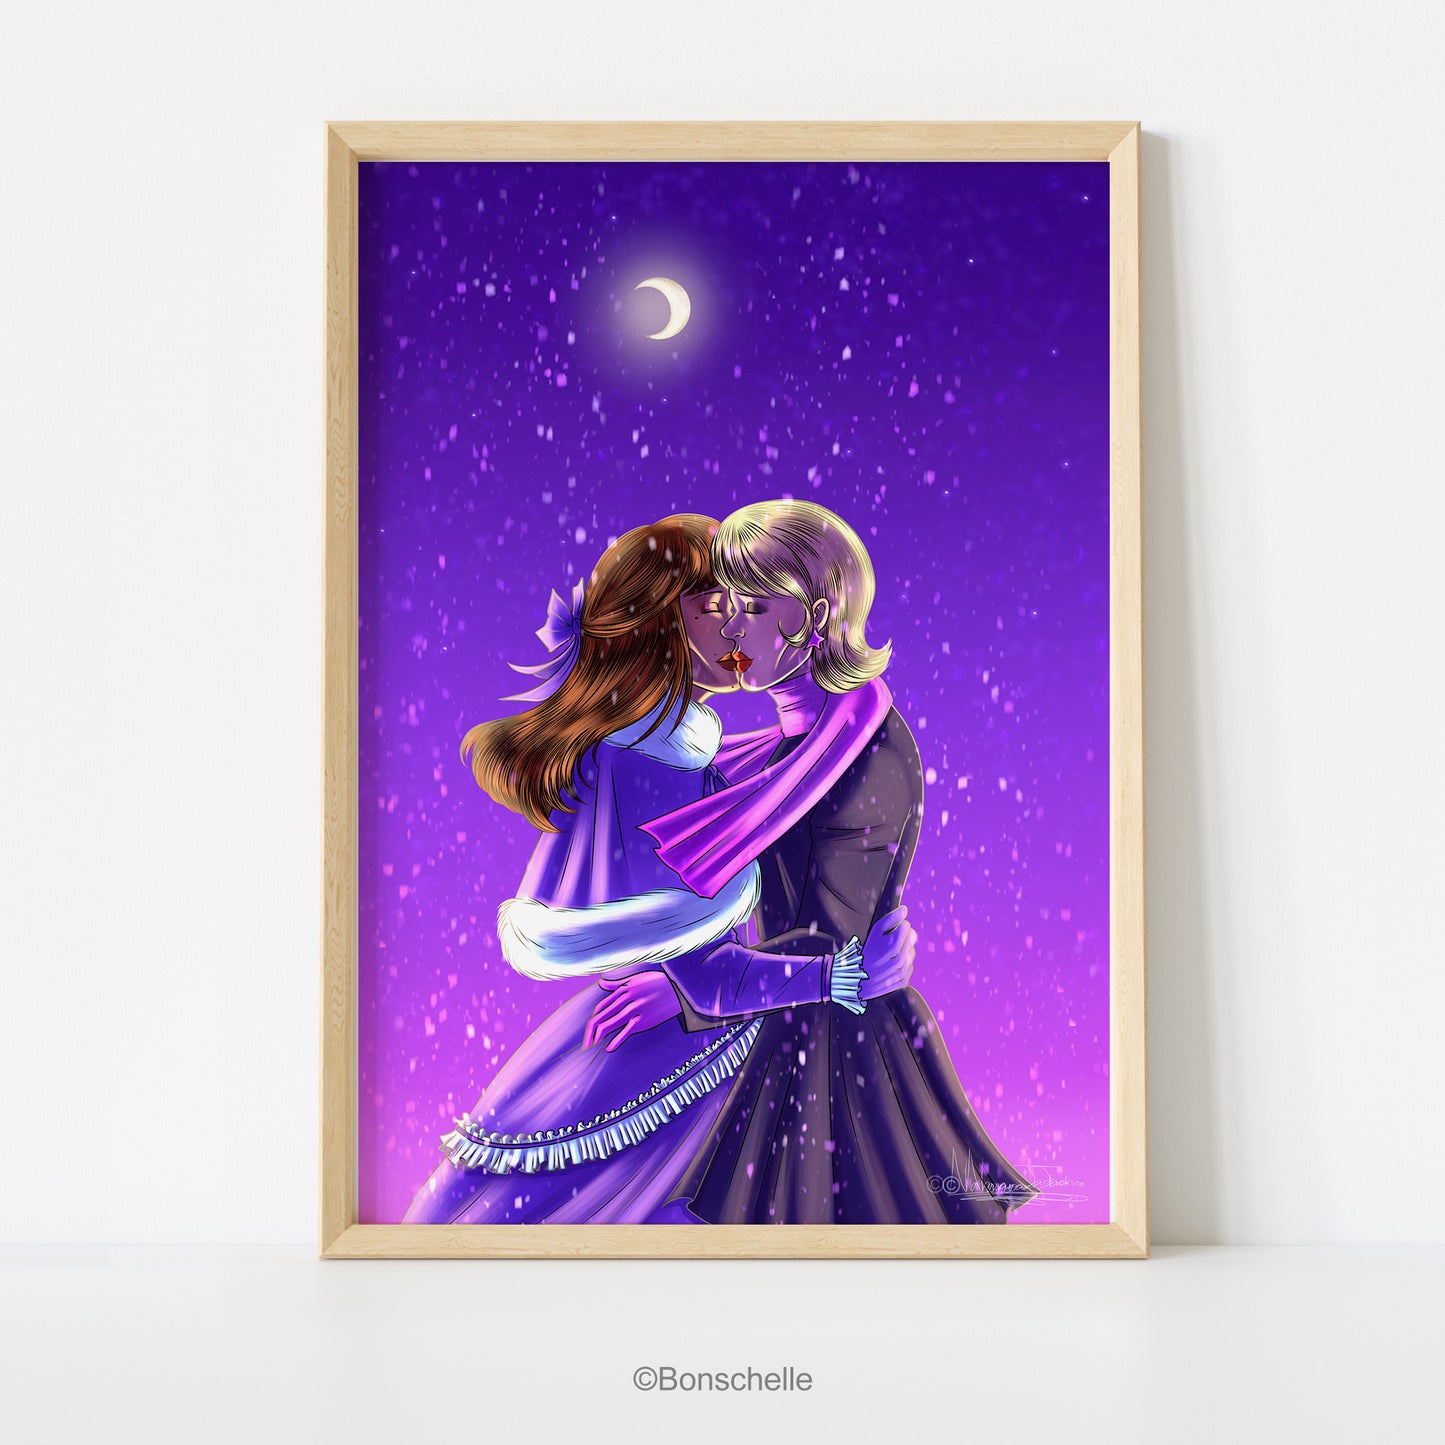 An original art print showing two young woman sharing a kiss in the snow against a purple night sky. A crescent moon is overhead.  The print is framed in pinewood.